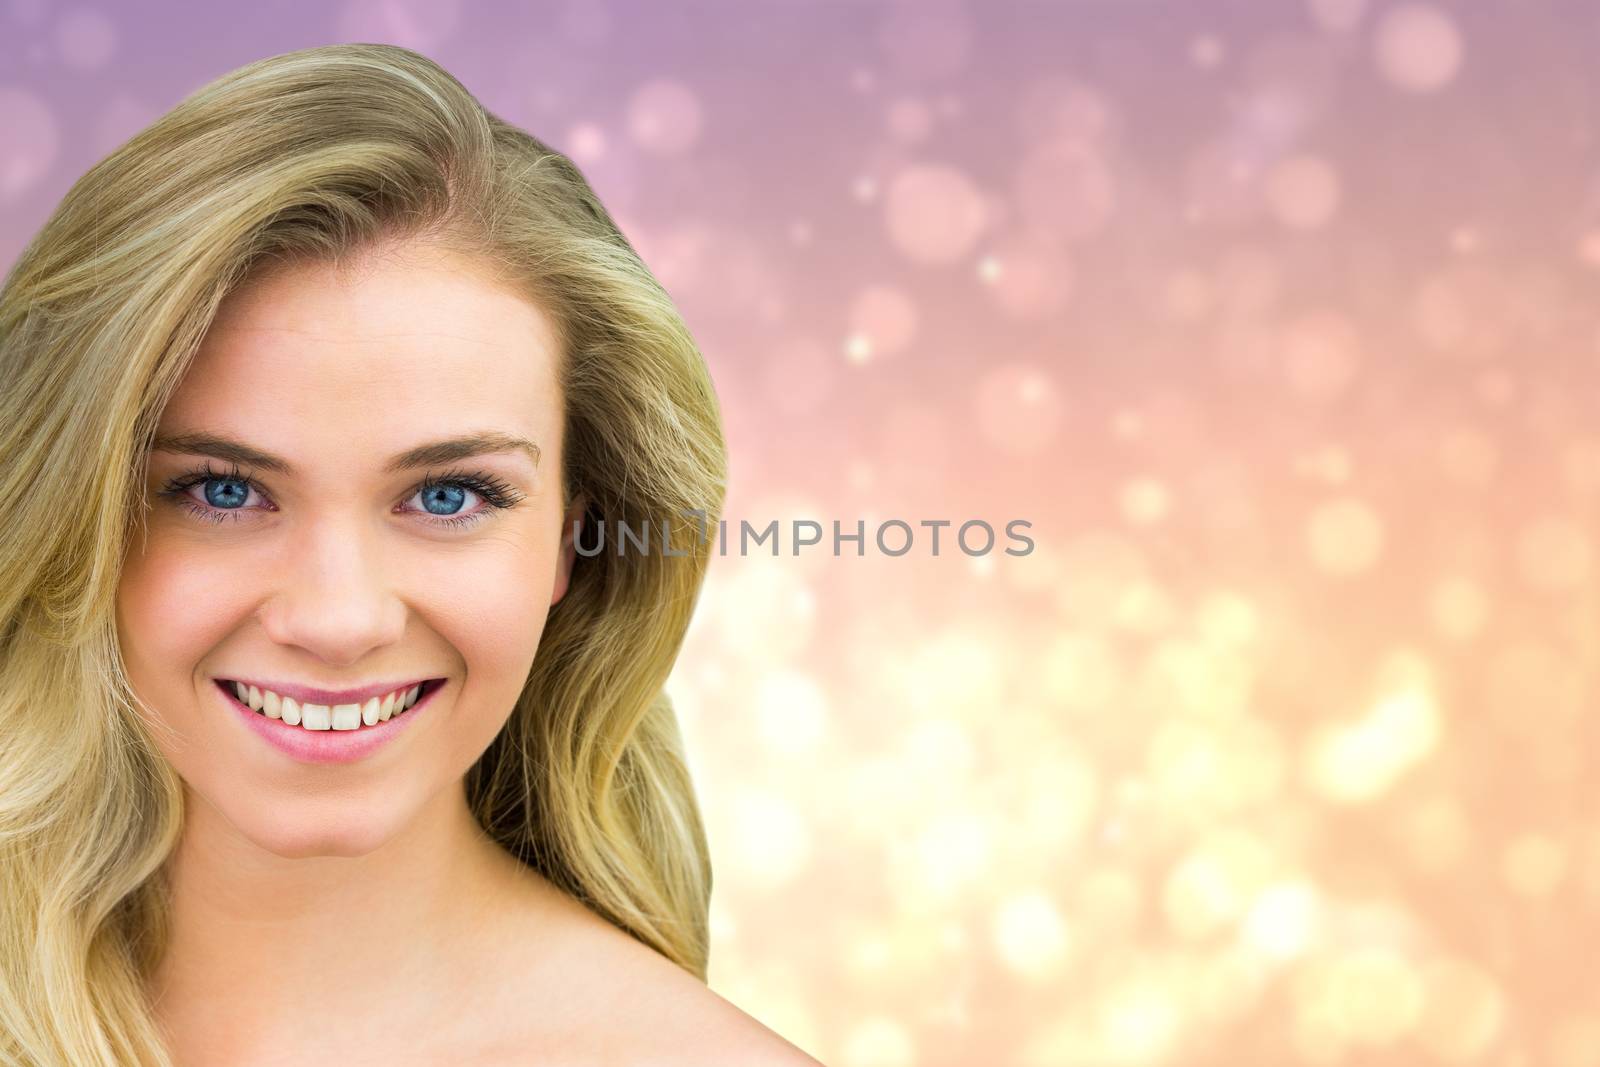 Smiling blonde natural beauty against pink abstract light spot design